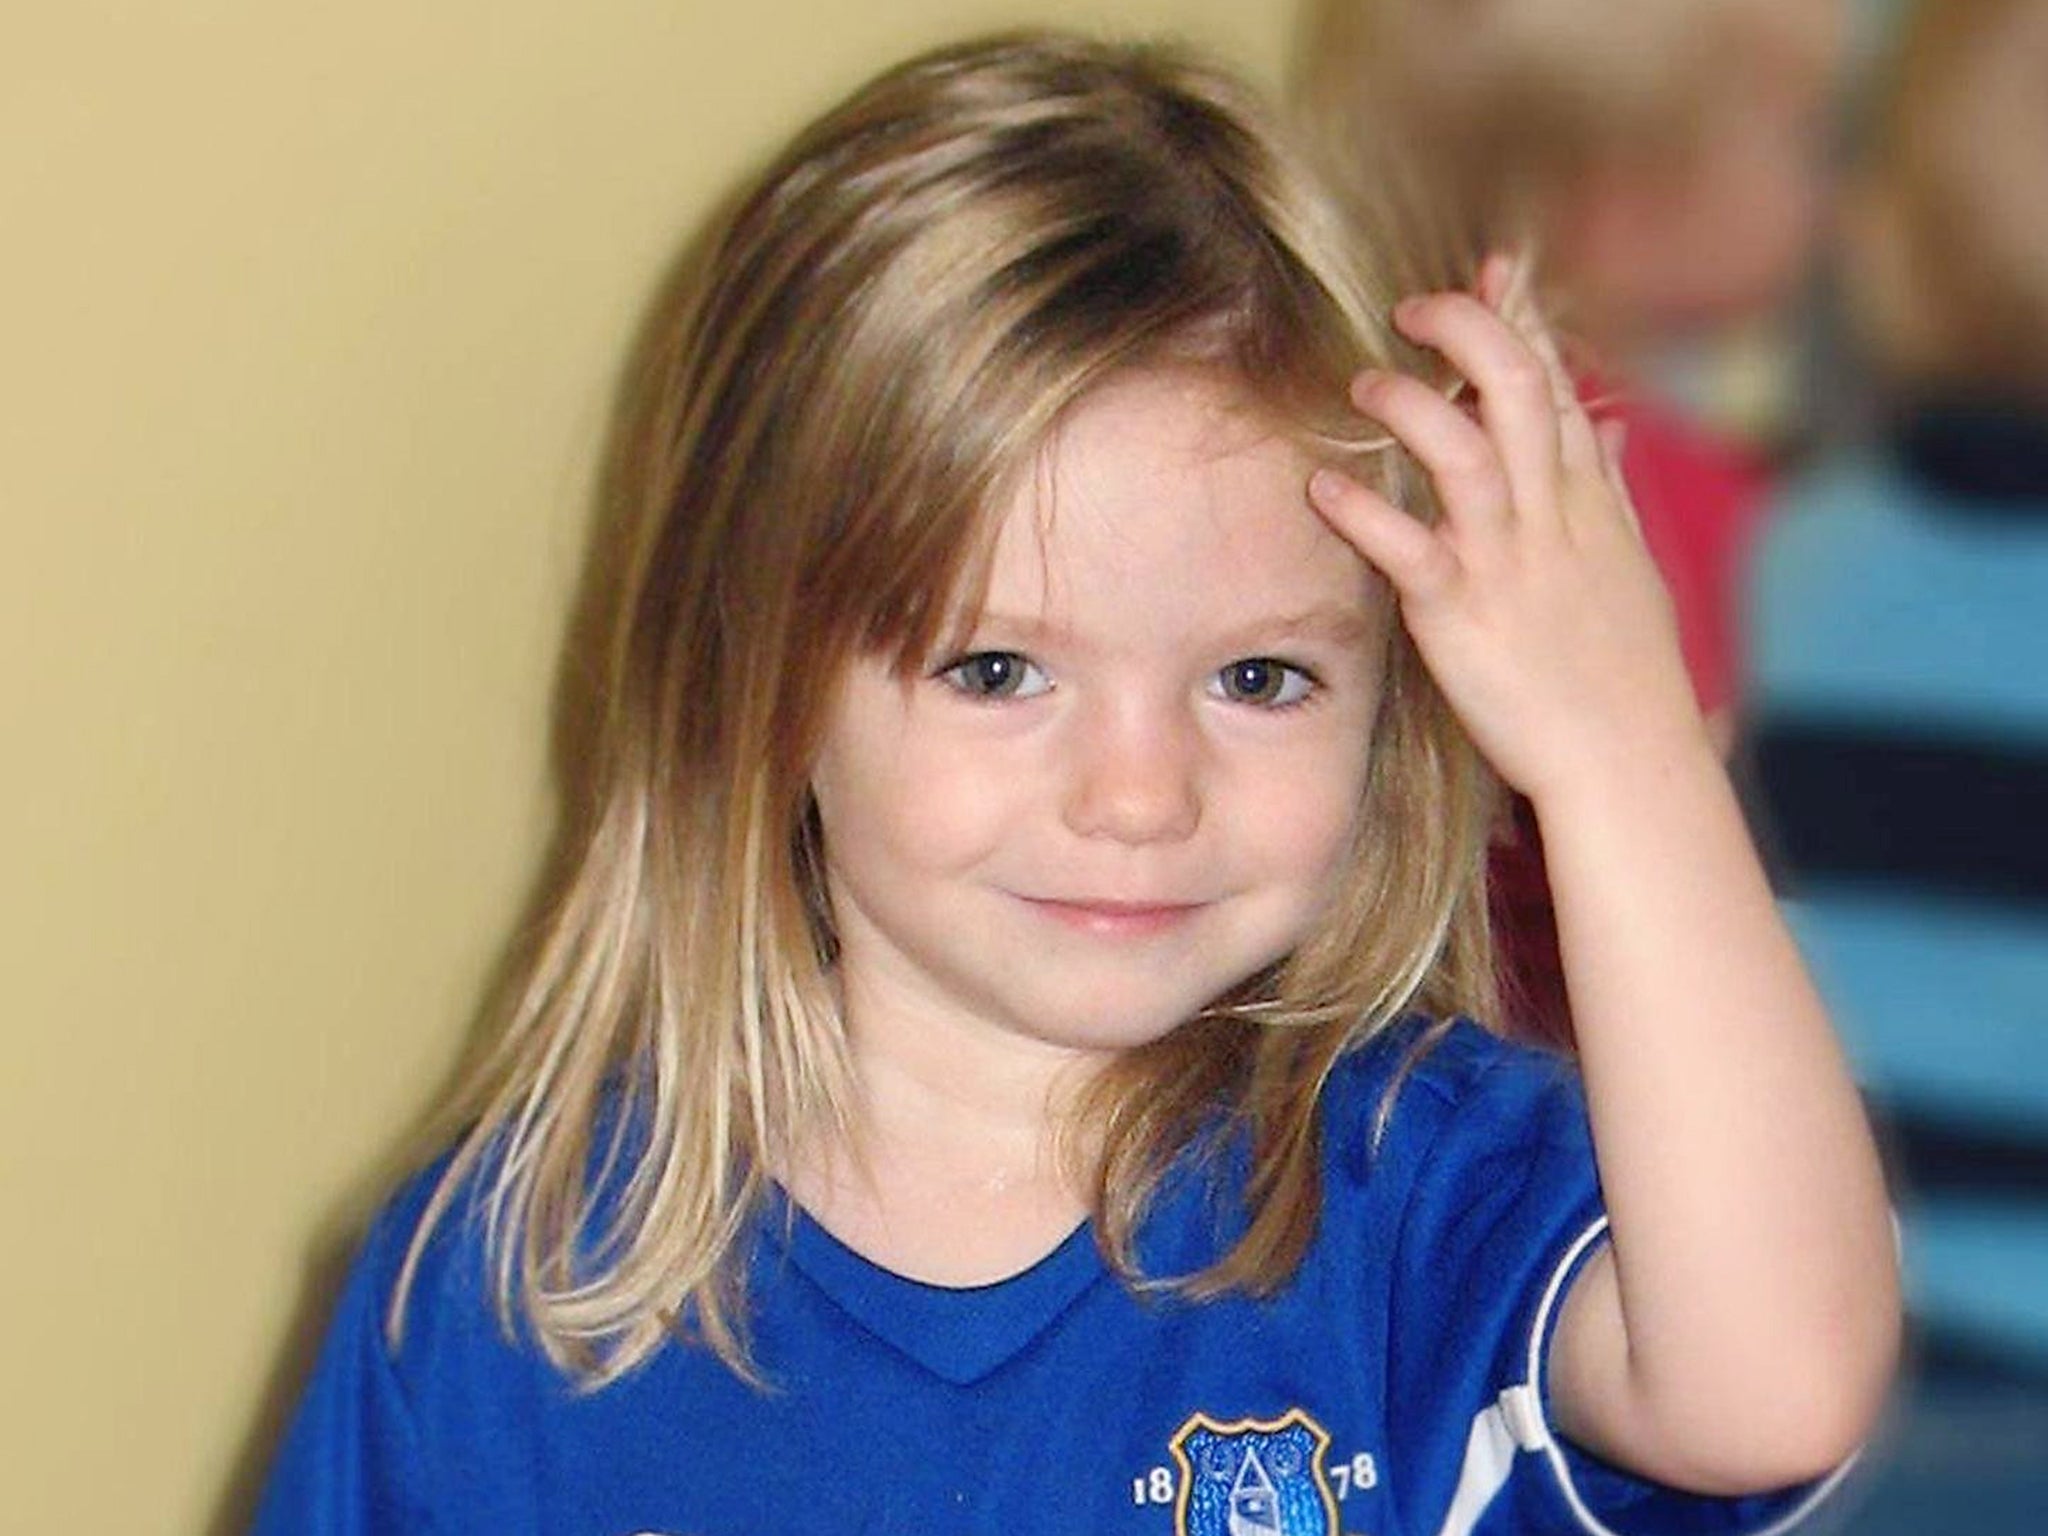 Madeleine?McCann(Family handout/PA) The little girl as she looked when she disappeared a decade ago